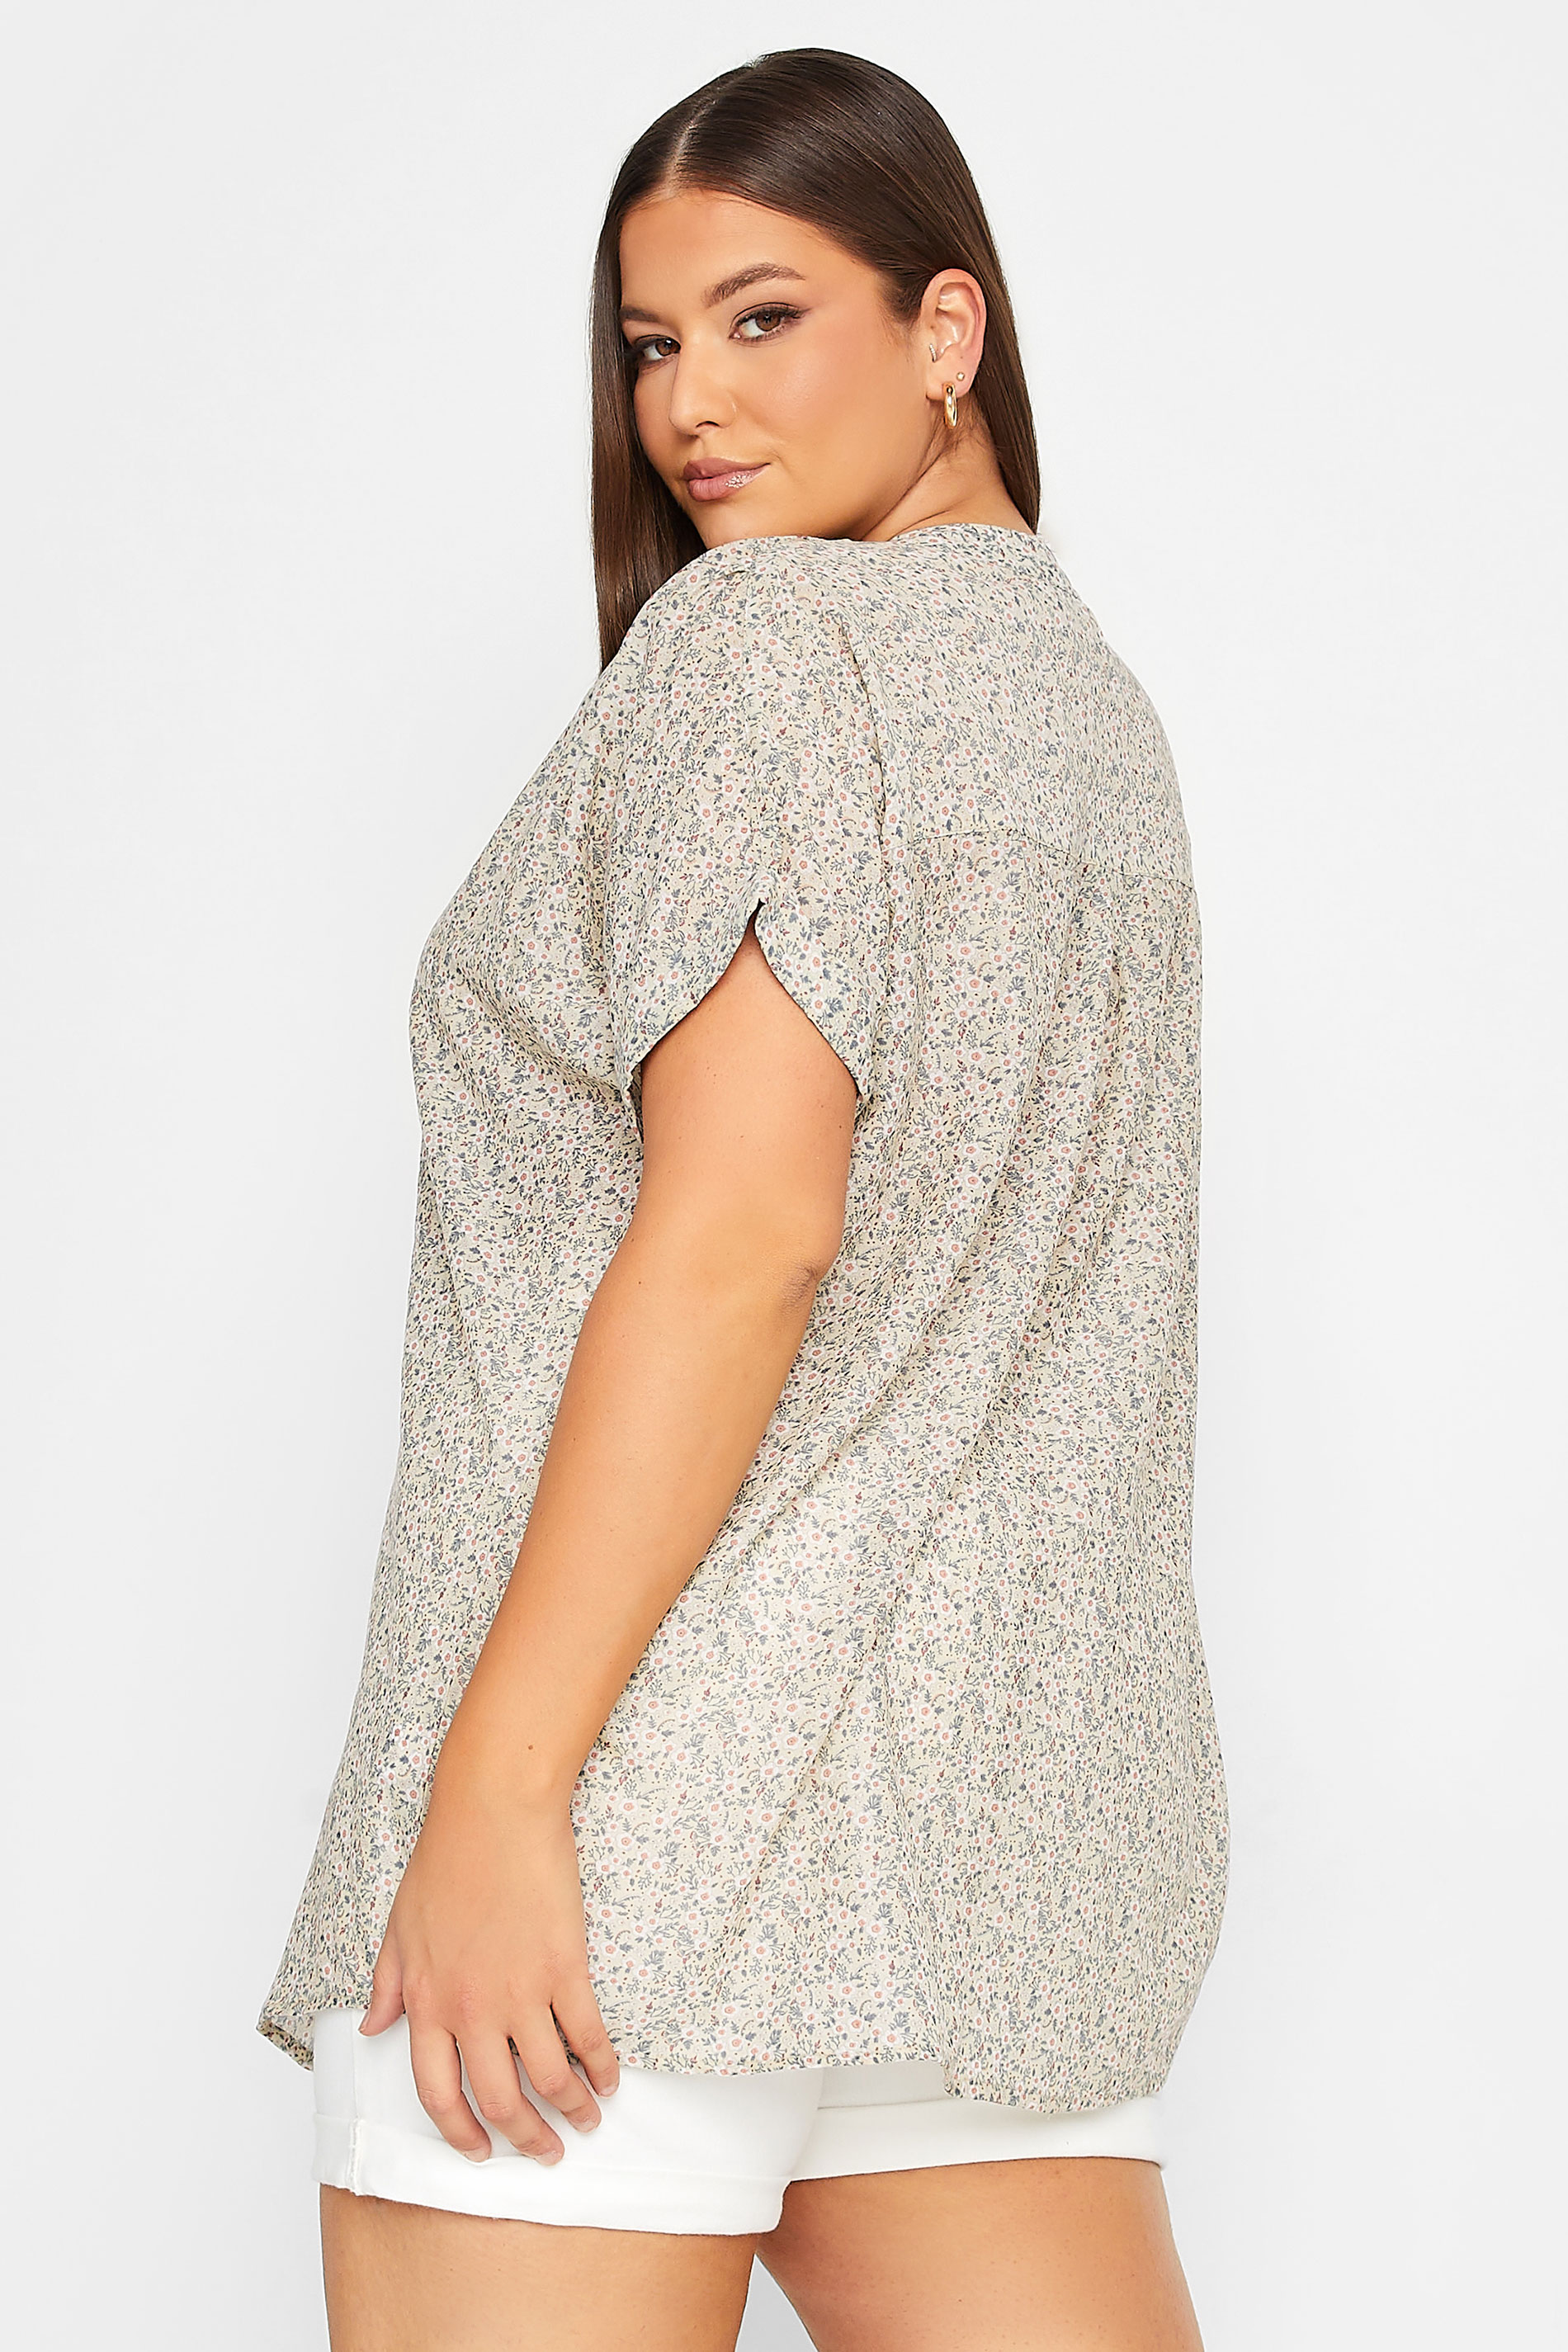 YOURS Plus Size Curve White Ditsy Print Half Placket Shirt | Yours Clothing  3